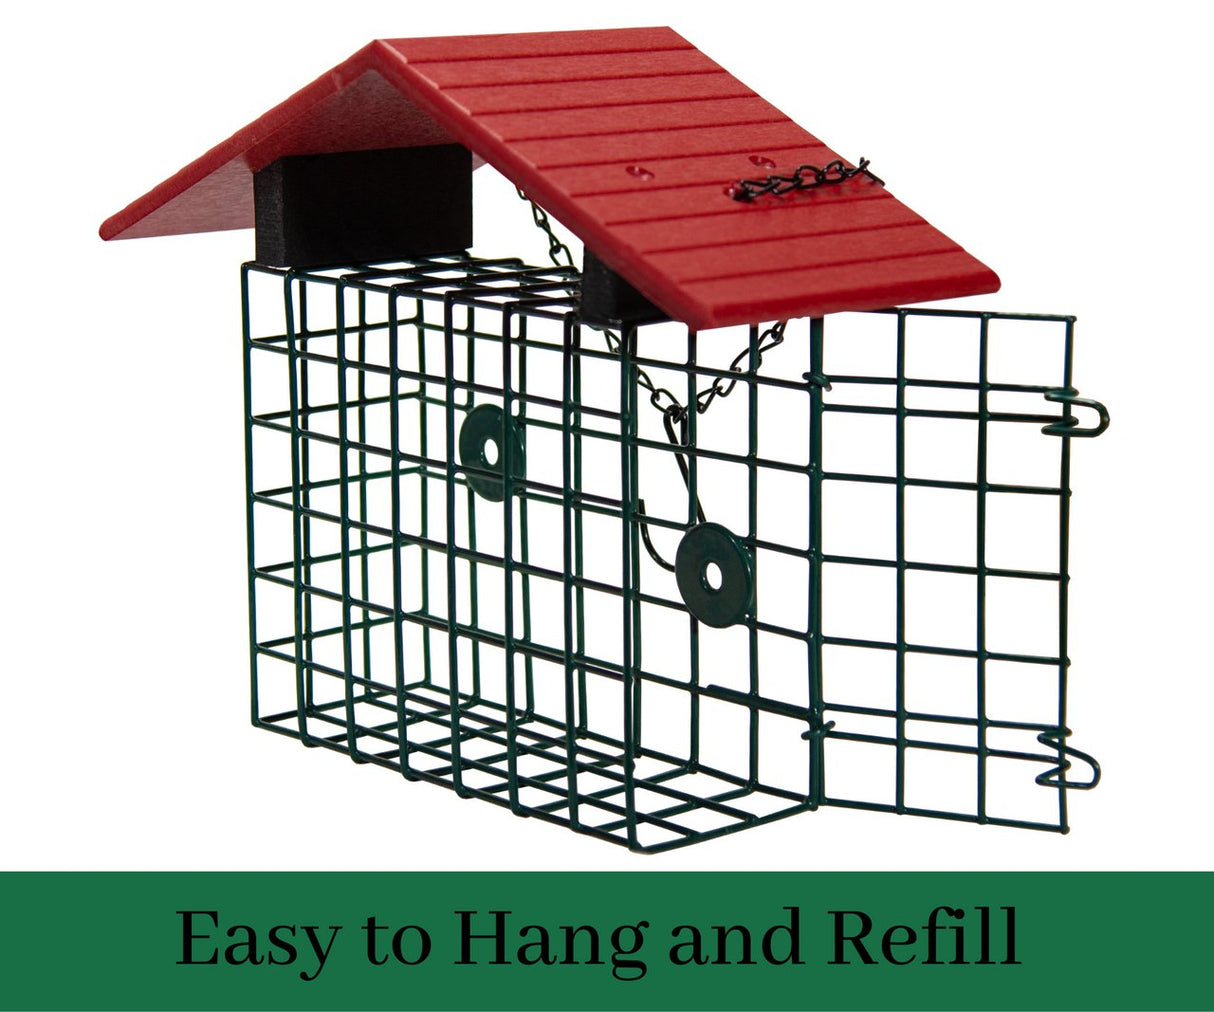 JCS Wildlife XL Suet Cage with Recycled Poly Lumber Roof - JCS Wildlife